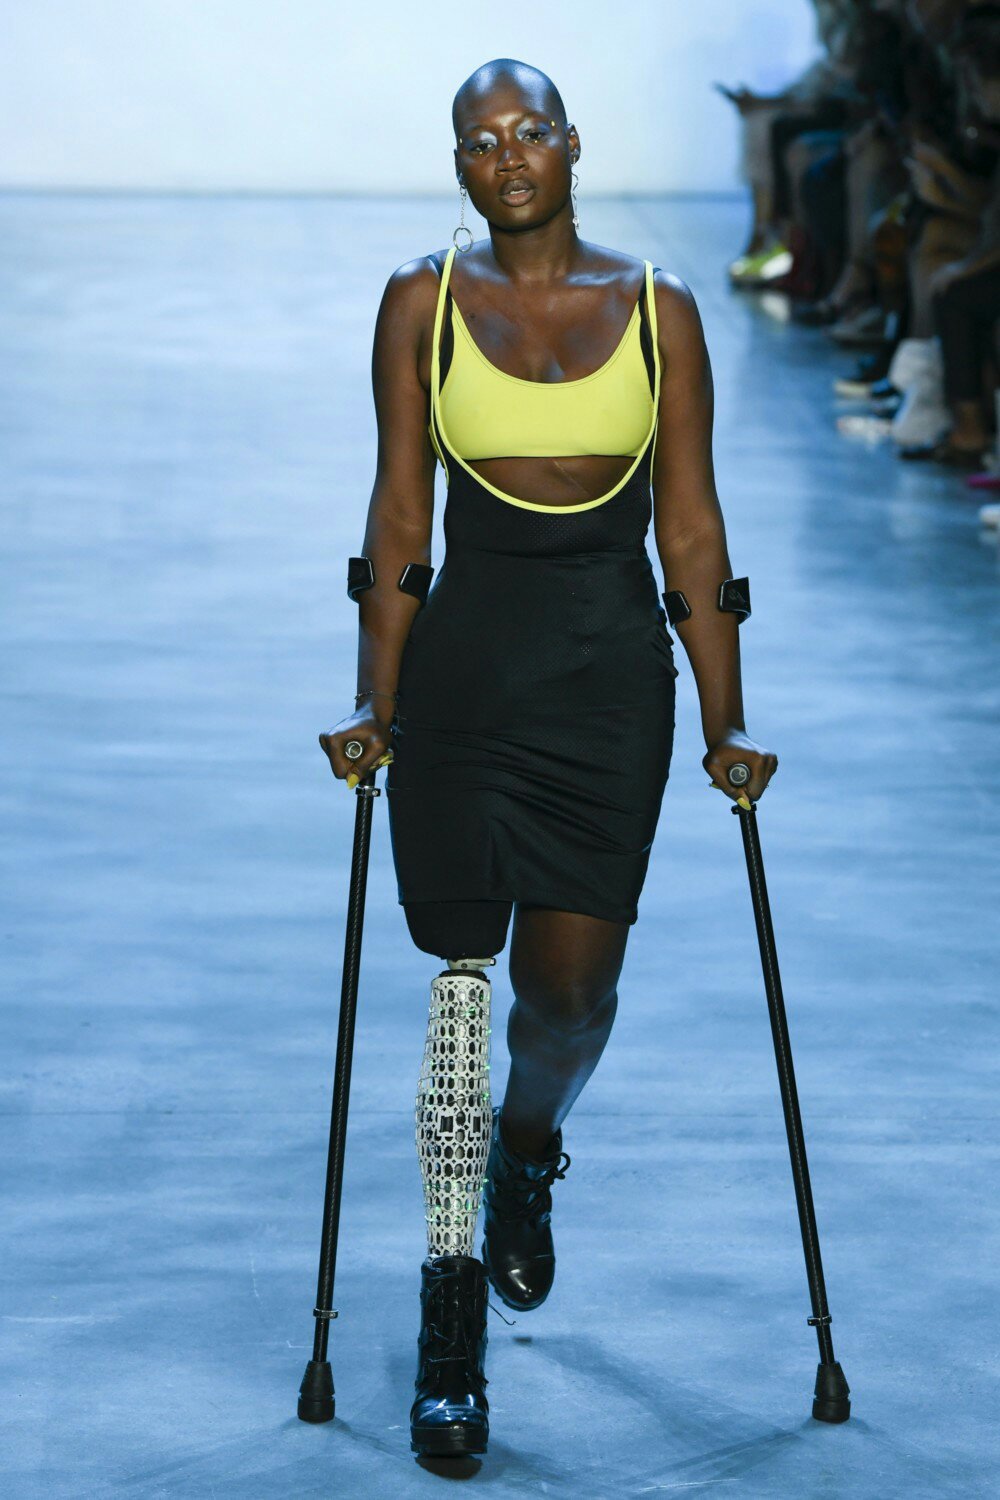 Meet 28-Year Old Amputee Model With One Leg Who Walked The Runway At NYFW  (Photos)